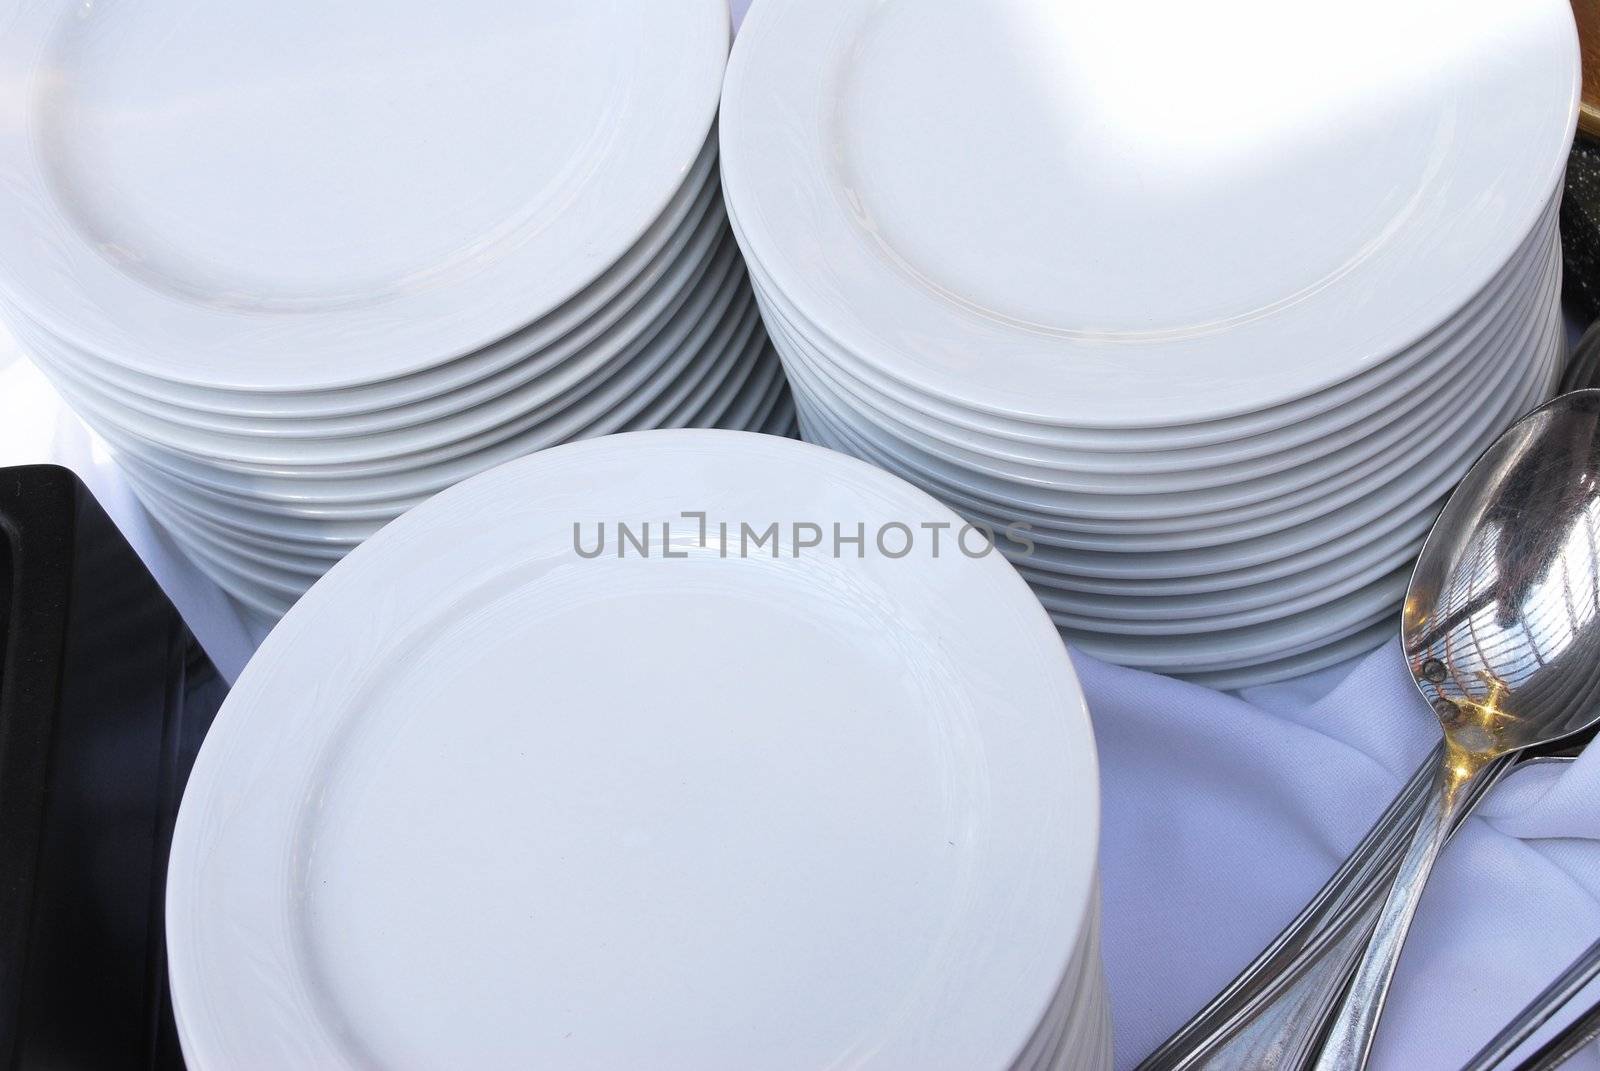 Three stacks of white dinner plates used at a catered event